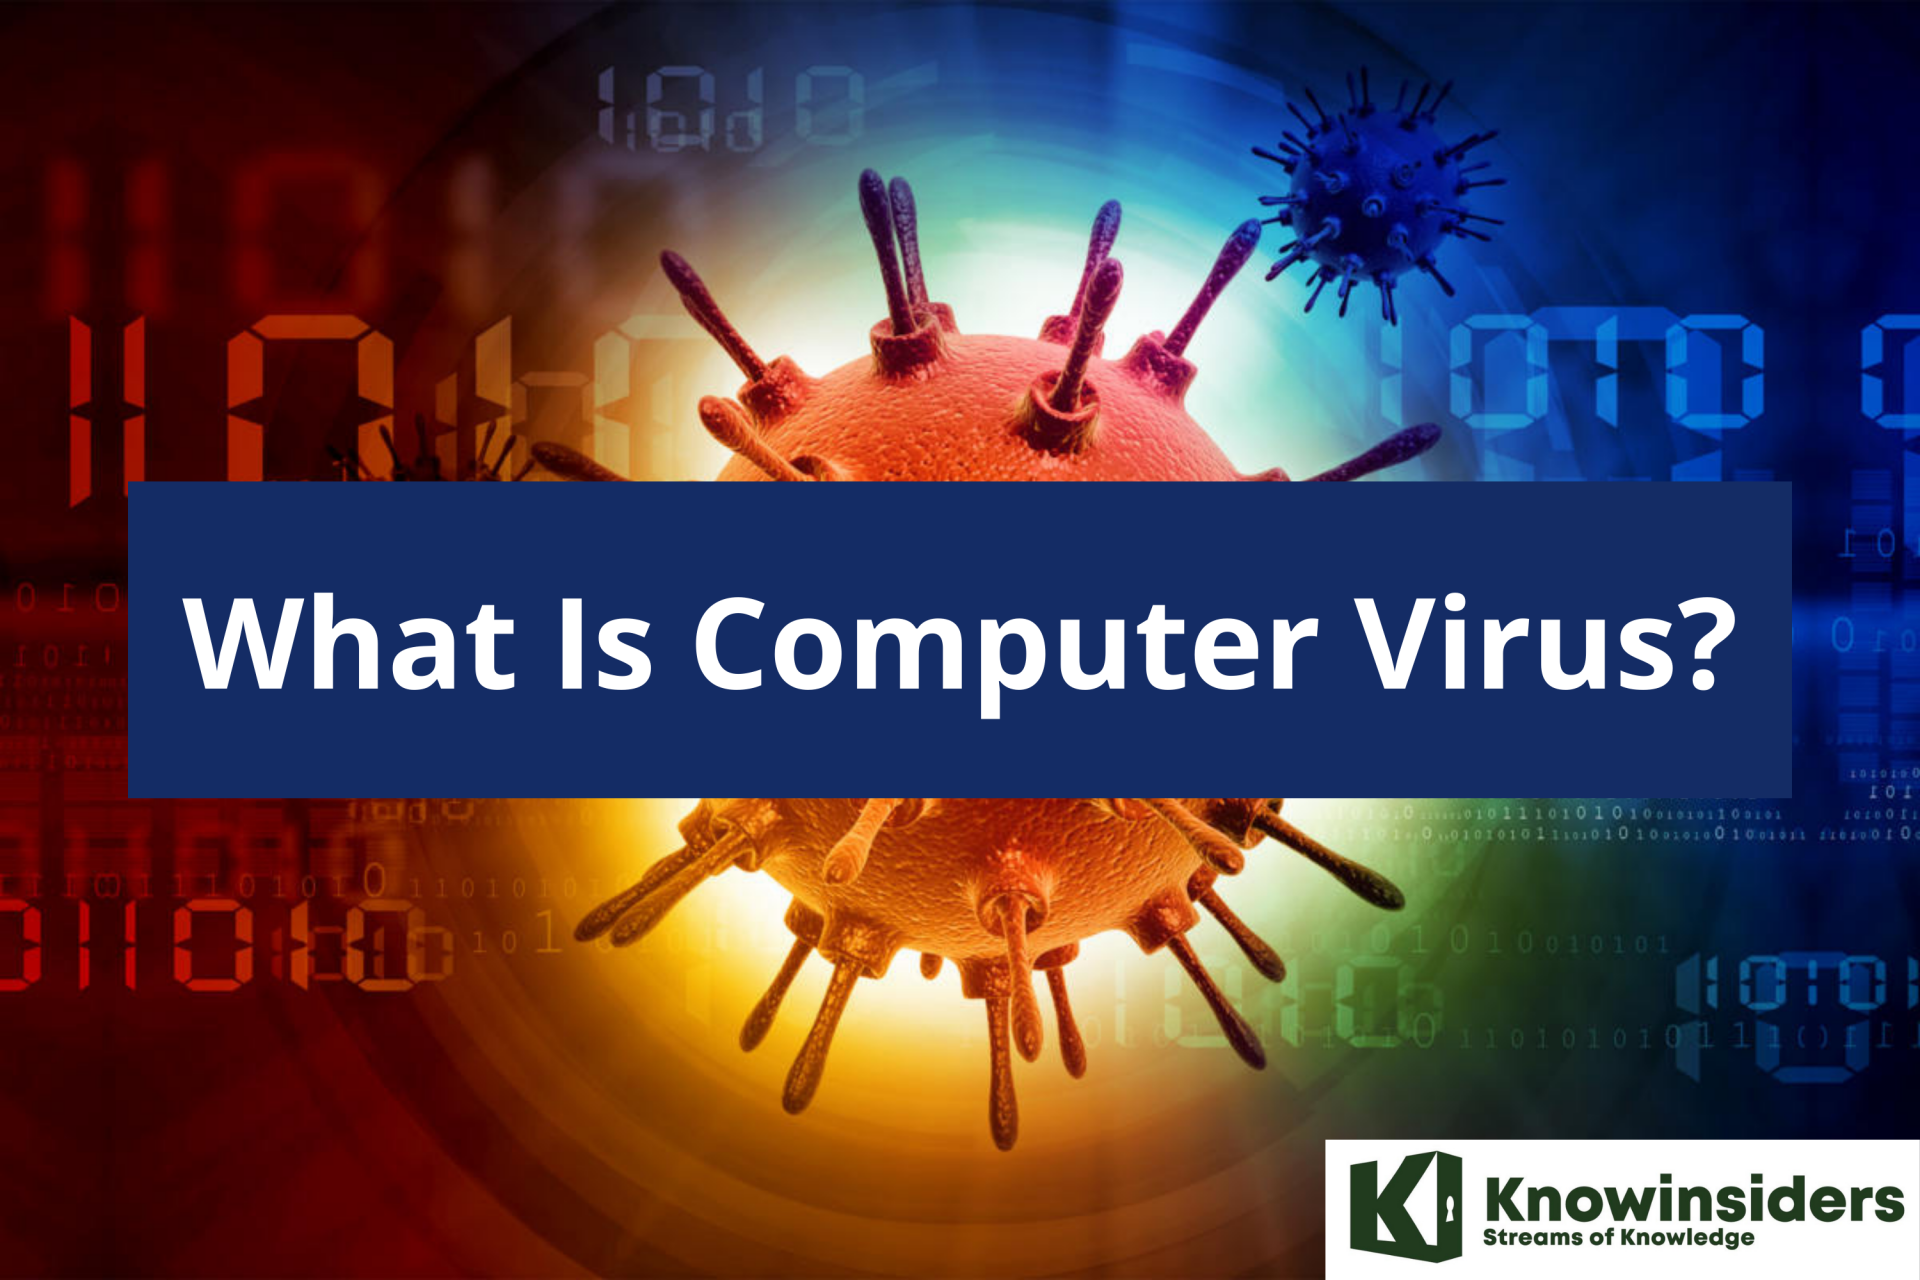 What Are Computer Viruses And How Do They Spread?